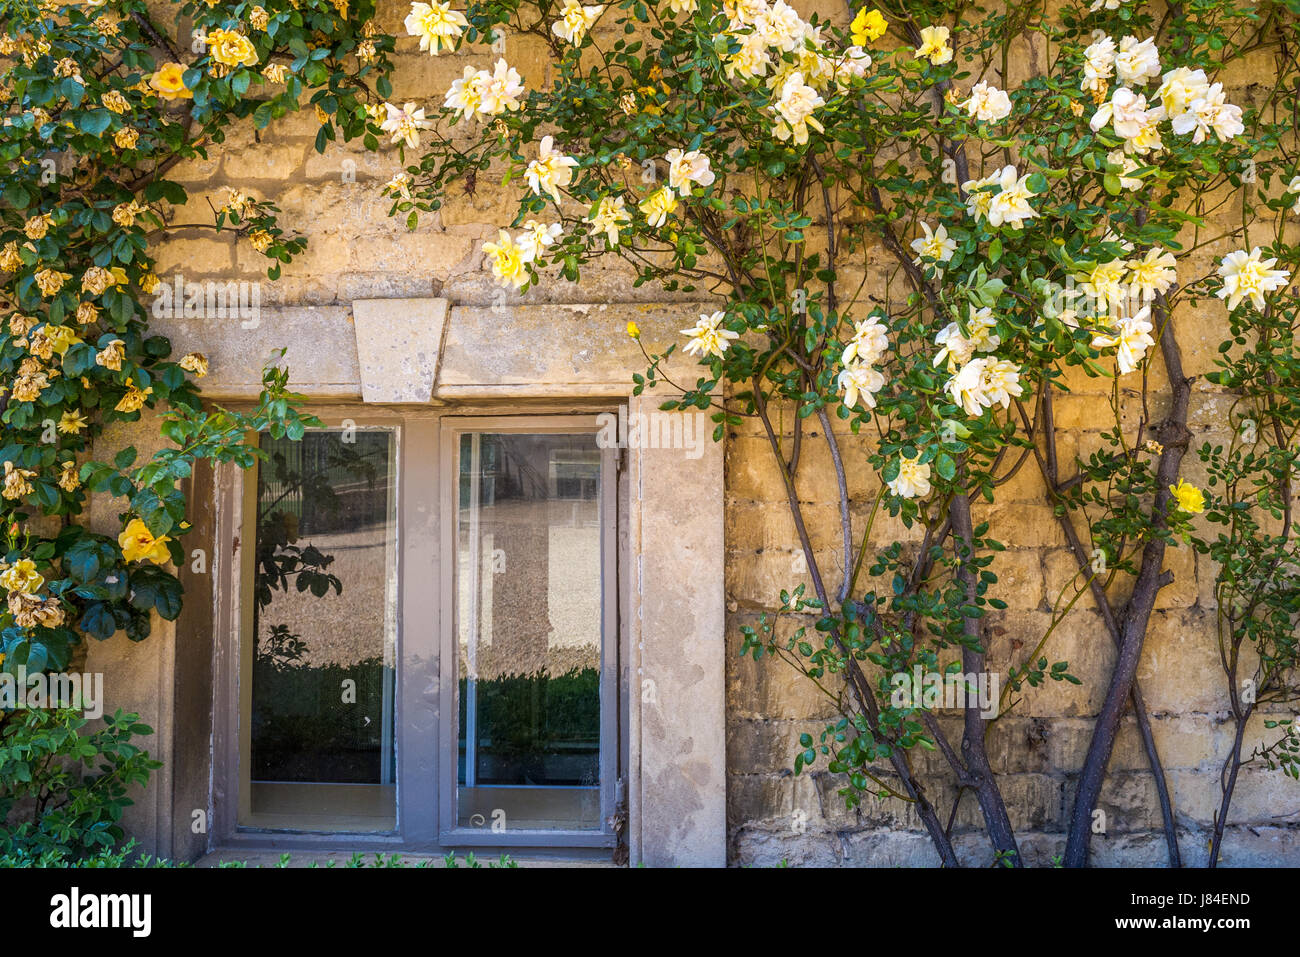 Yellow roses around a stone framed window. Stock Photo